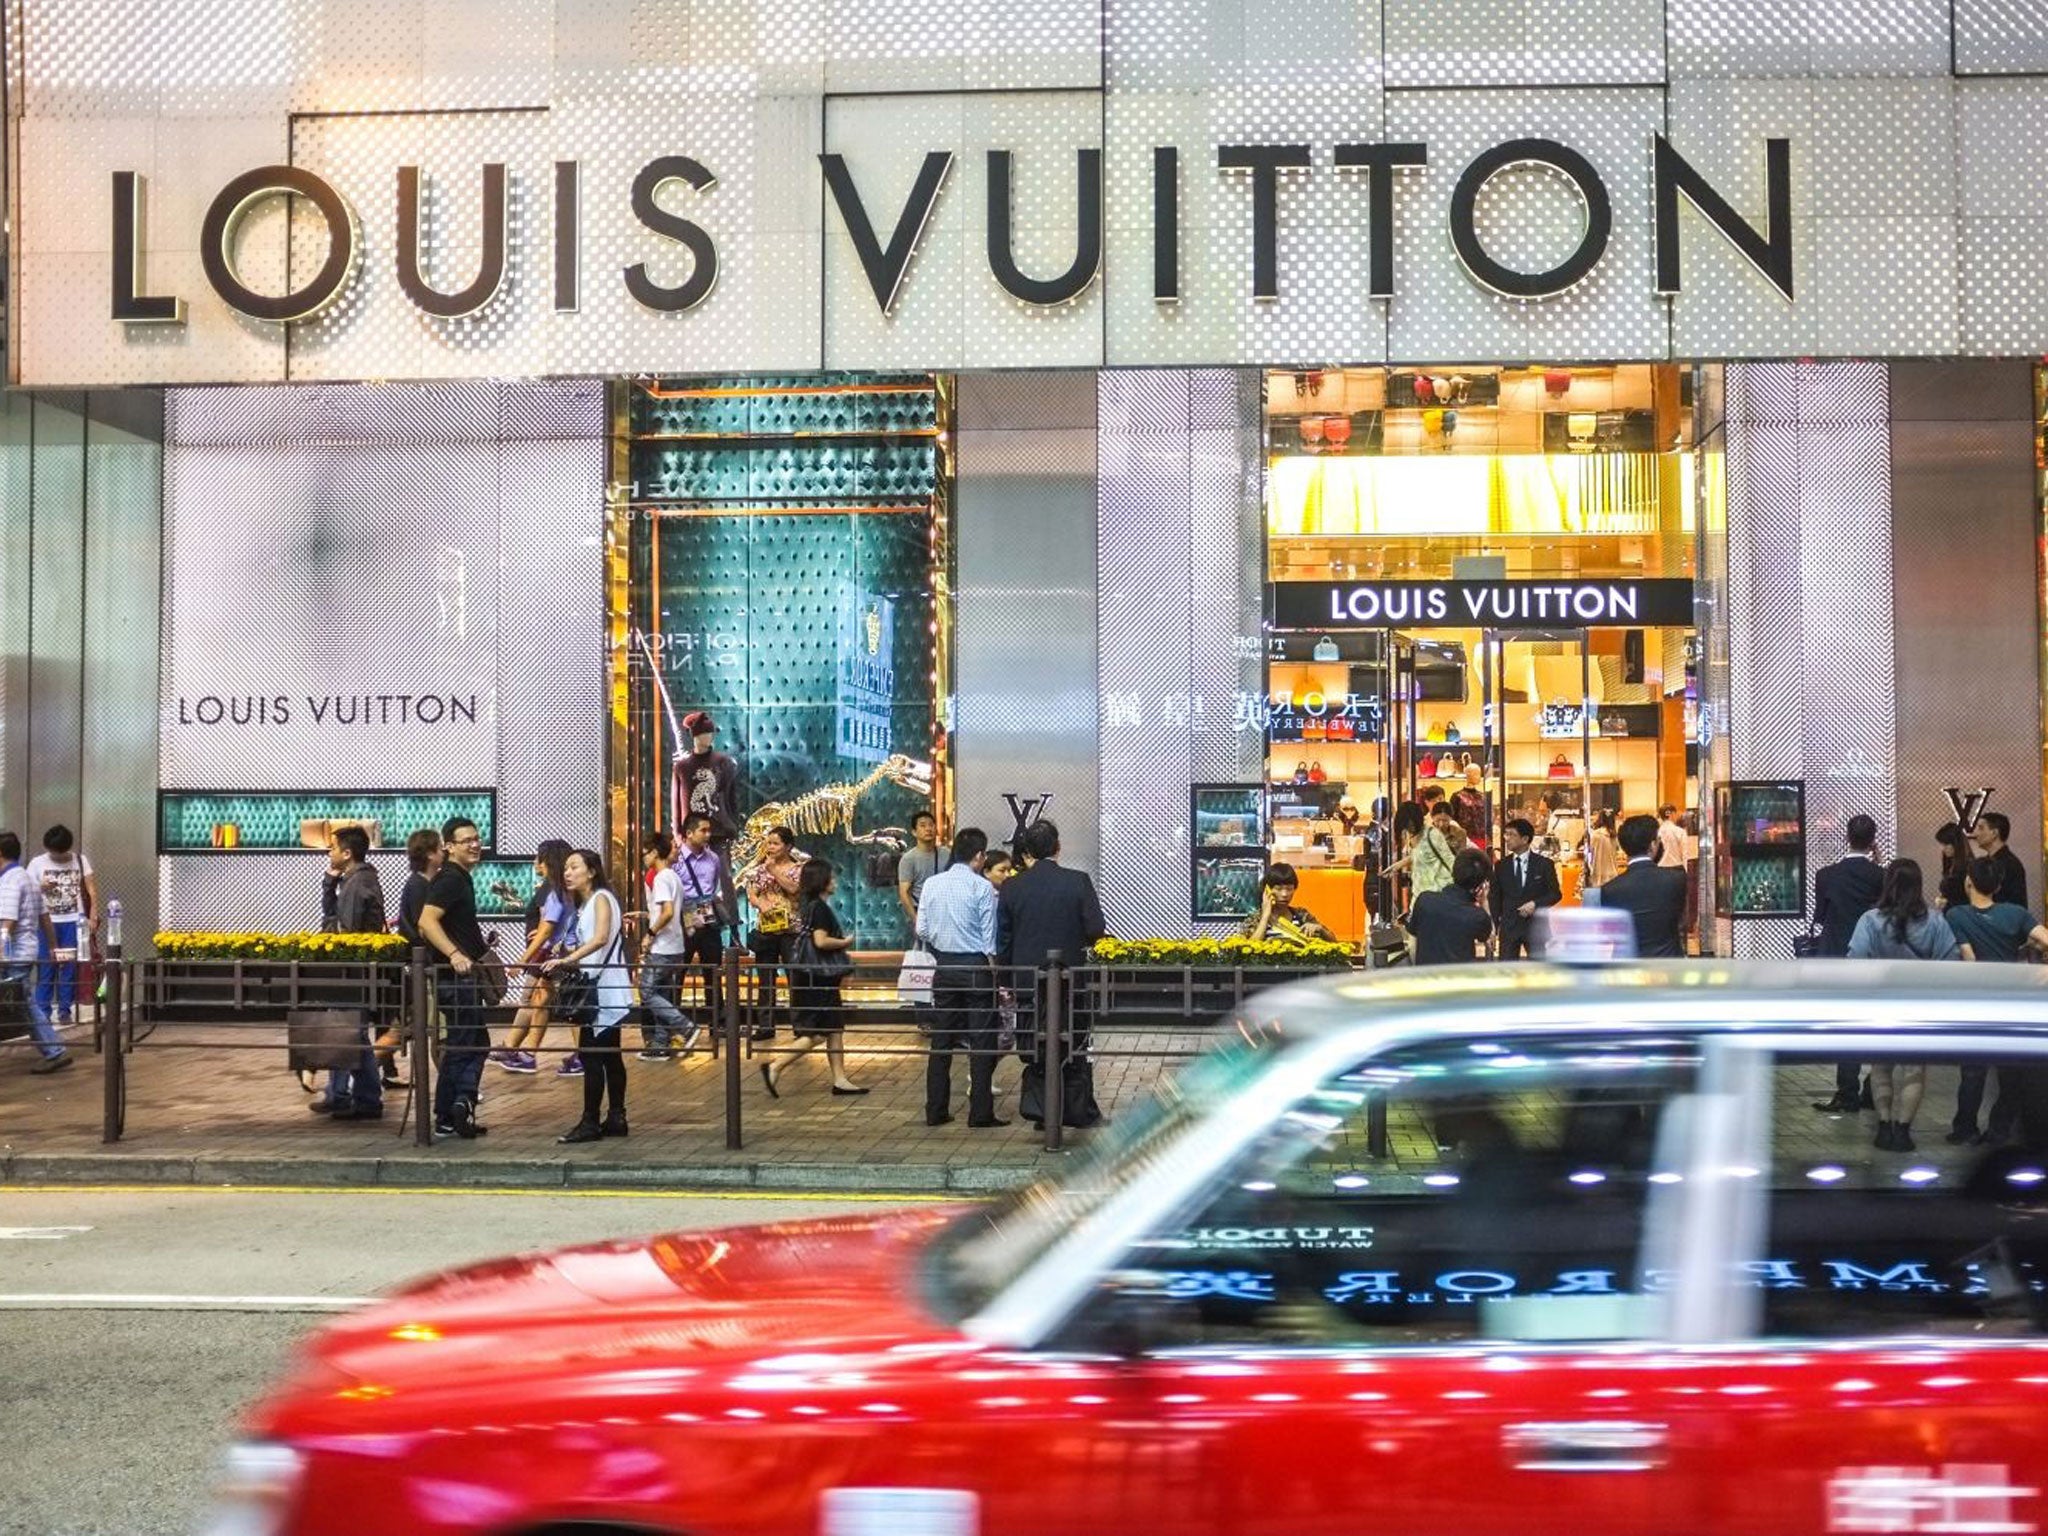 Louis Vuitton Fendi stores in upscale Hong Kong mall Times Square close  months after rift with LVMH over rent reduction  South China Morning Post